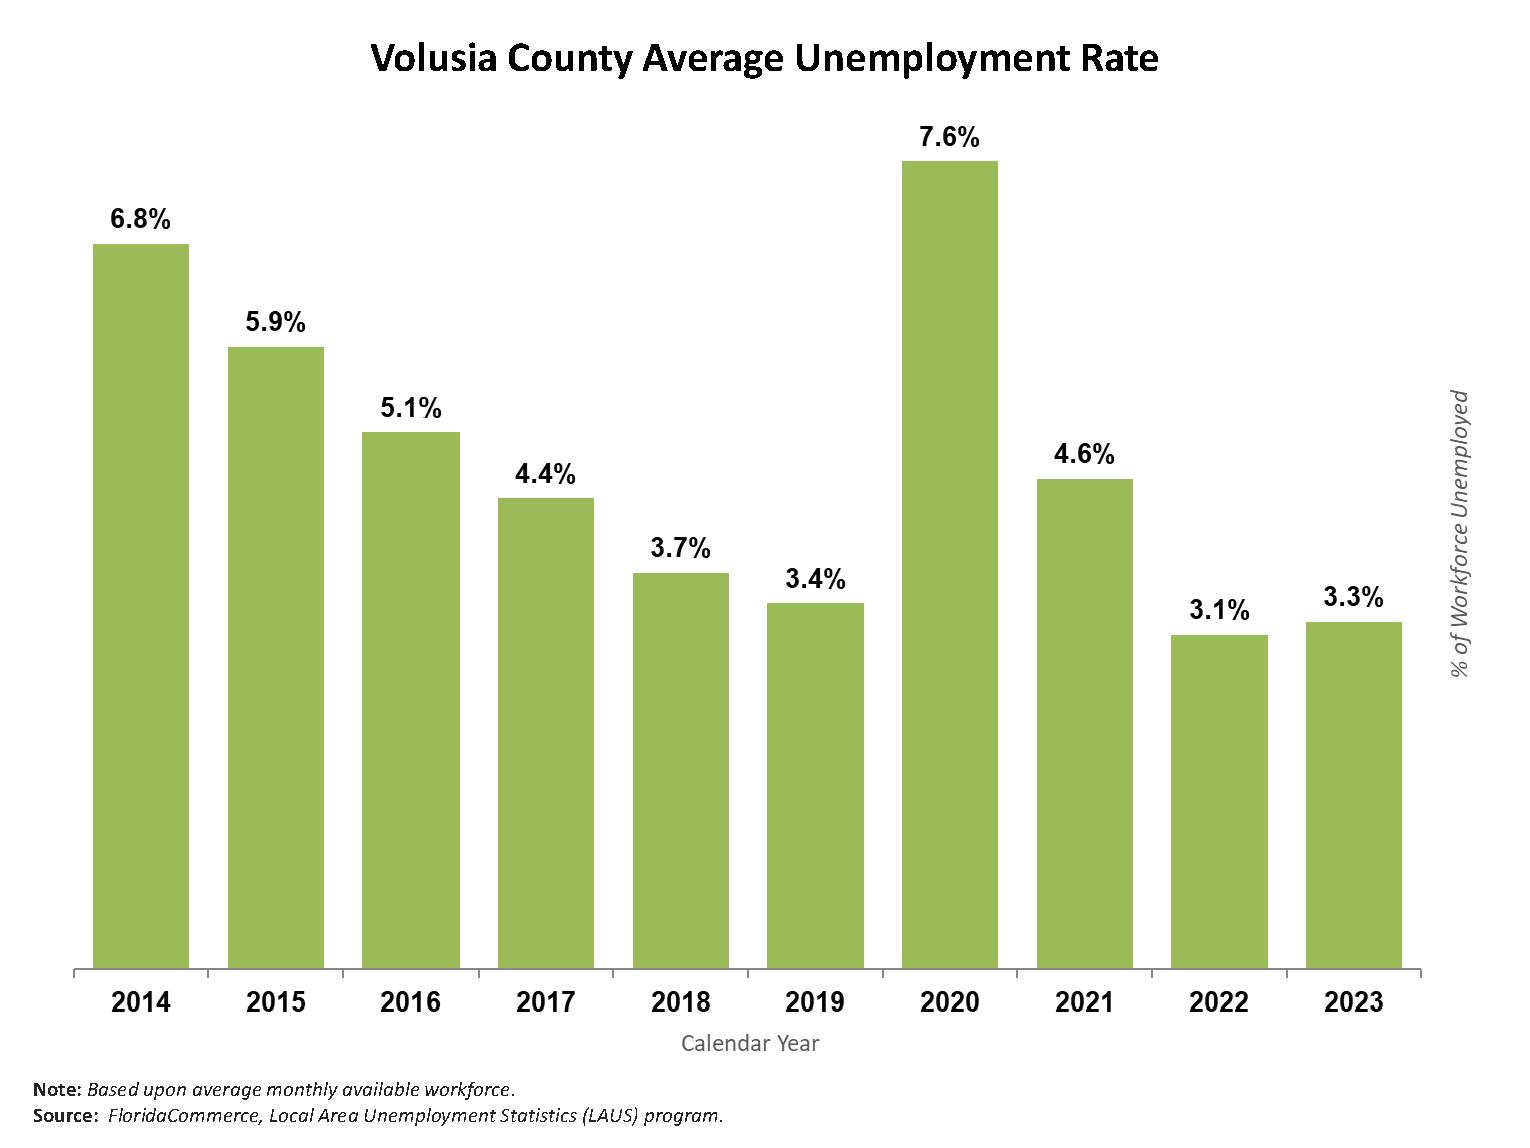 Volusia County’s annual average unemployment rate showed improvement steadily from the 6.8% rate in 2014 to 3.4% in 2019. With the onset of the COVID-19 pandemic and associated shutdowns and recovery, the average unemployment for 2020 was 7.6%. In 2021, the unemployment rate dropped to 4.6% in 2021, 3.1% in 2022 and as of 2023, the average rate was 3.3%.